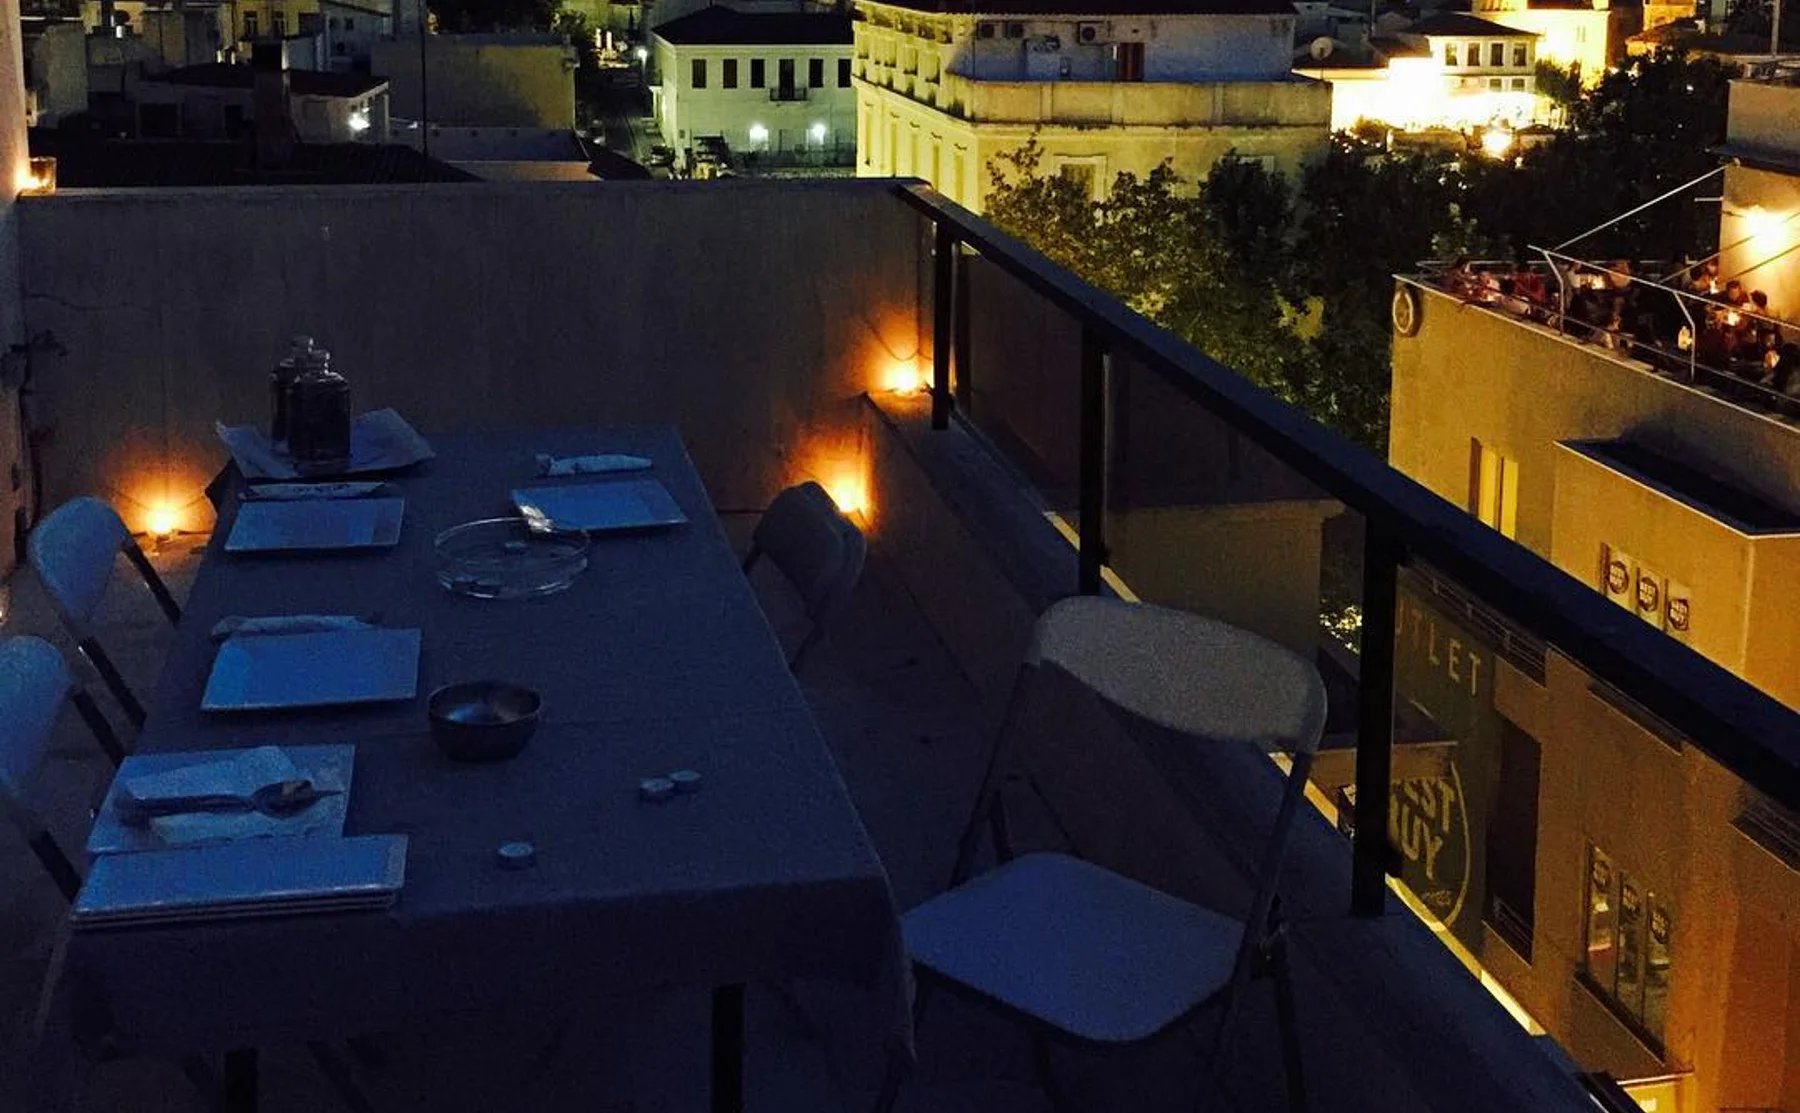 Athens Cooking class & Rooftop Dinner with Acropolis View - 376897